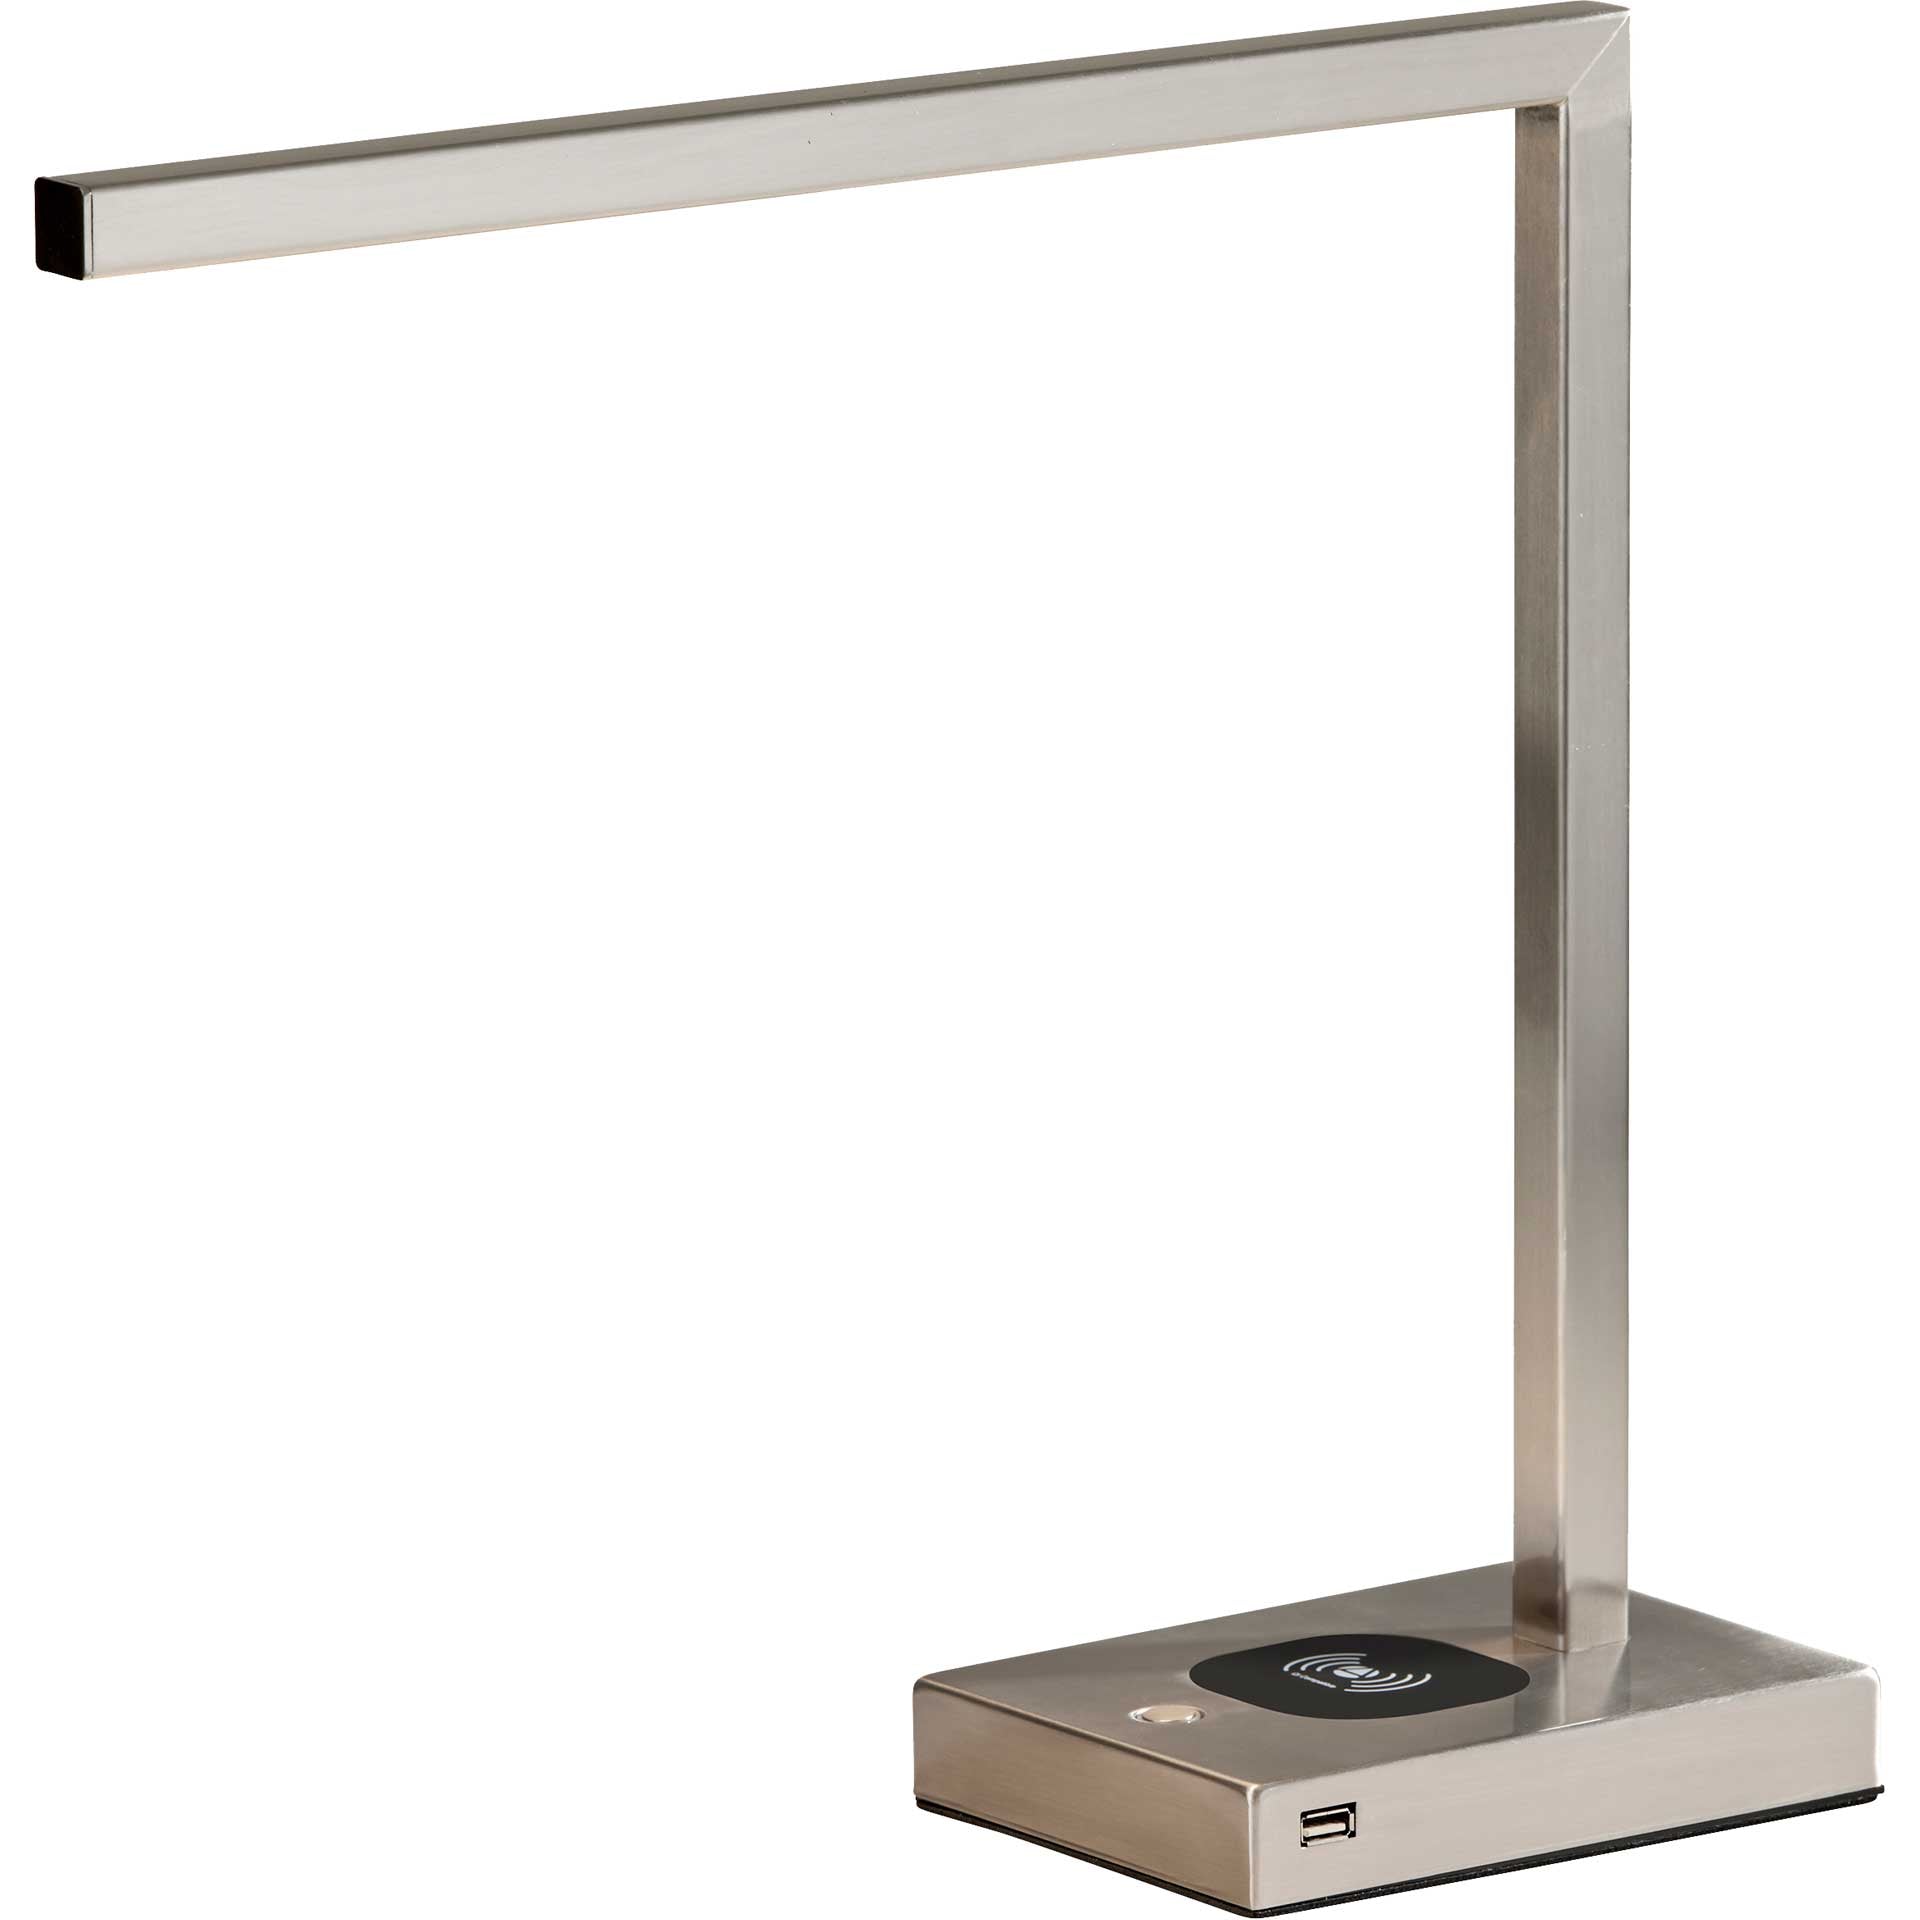 Abbeville Wireless Charge Desk Lamp Brushed Steel